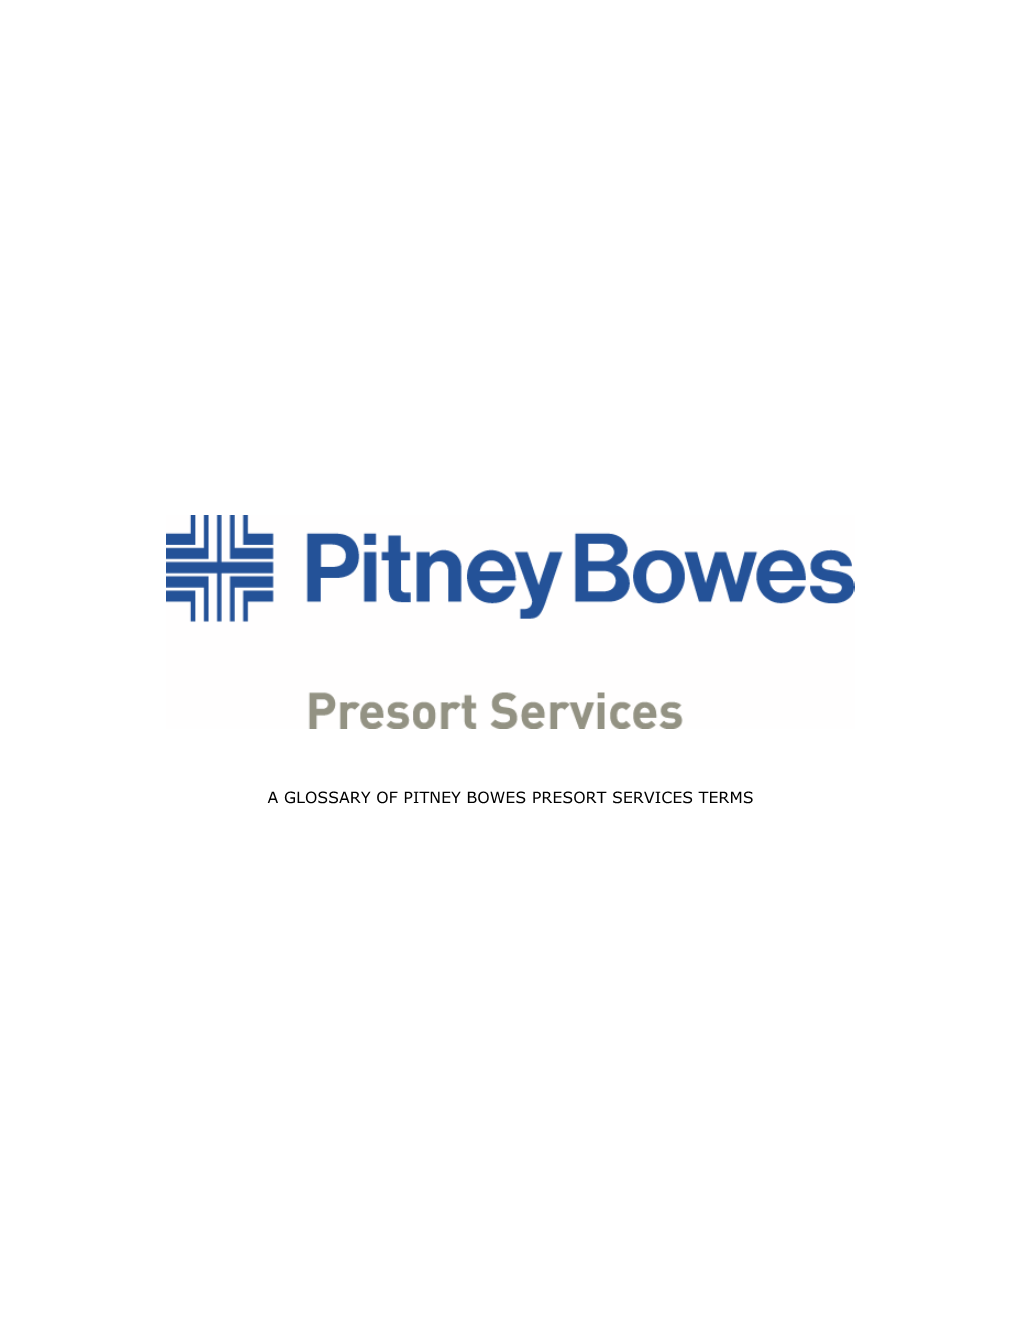 A GLOSSARY of PITNEY BOWES PRESORT SERVICES TERMS Glossary Table of Contents